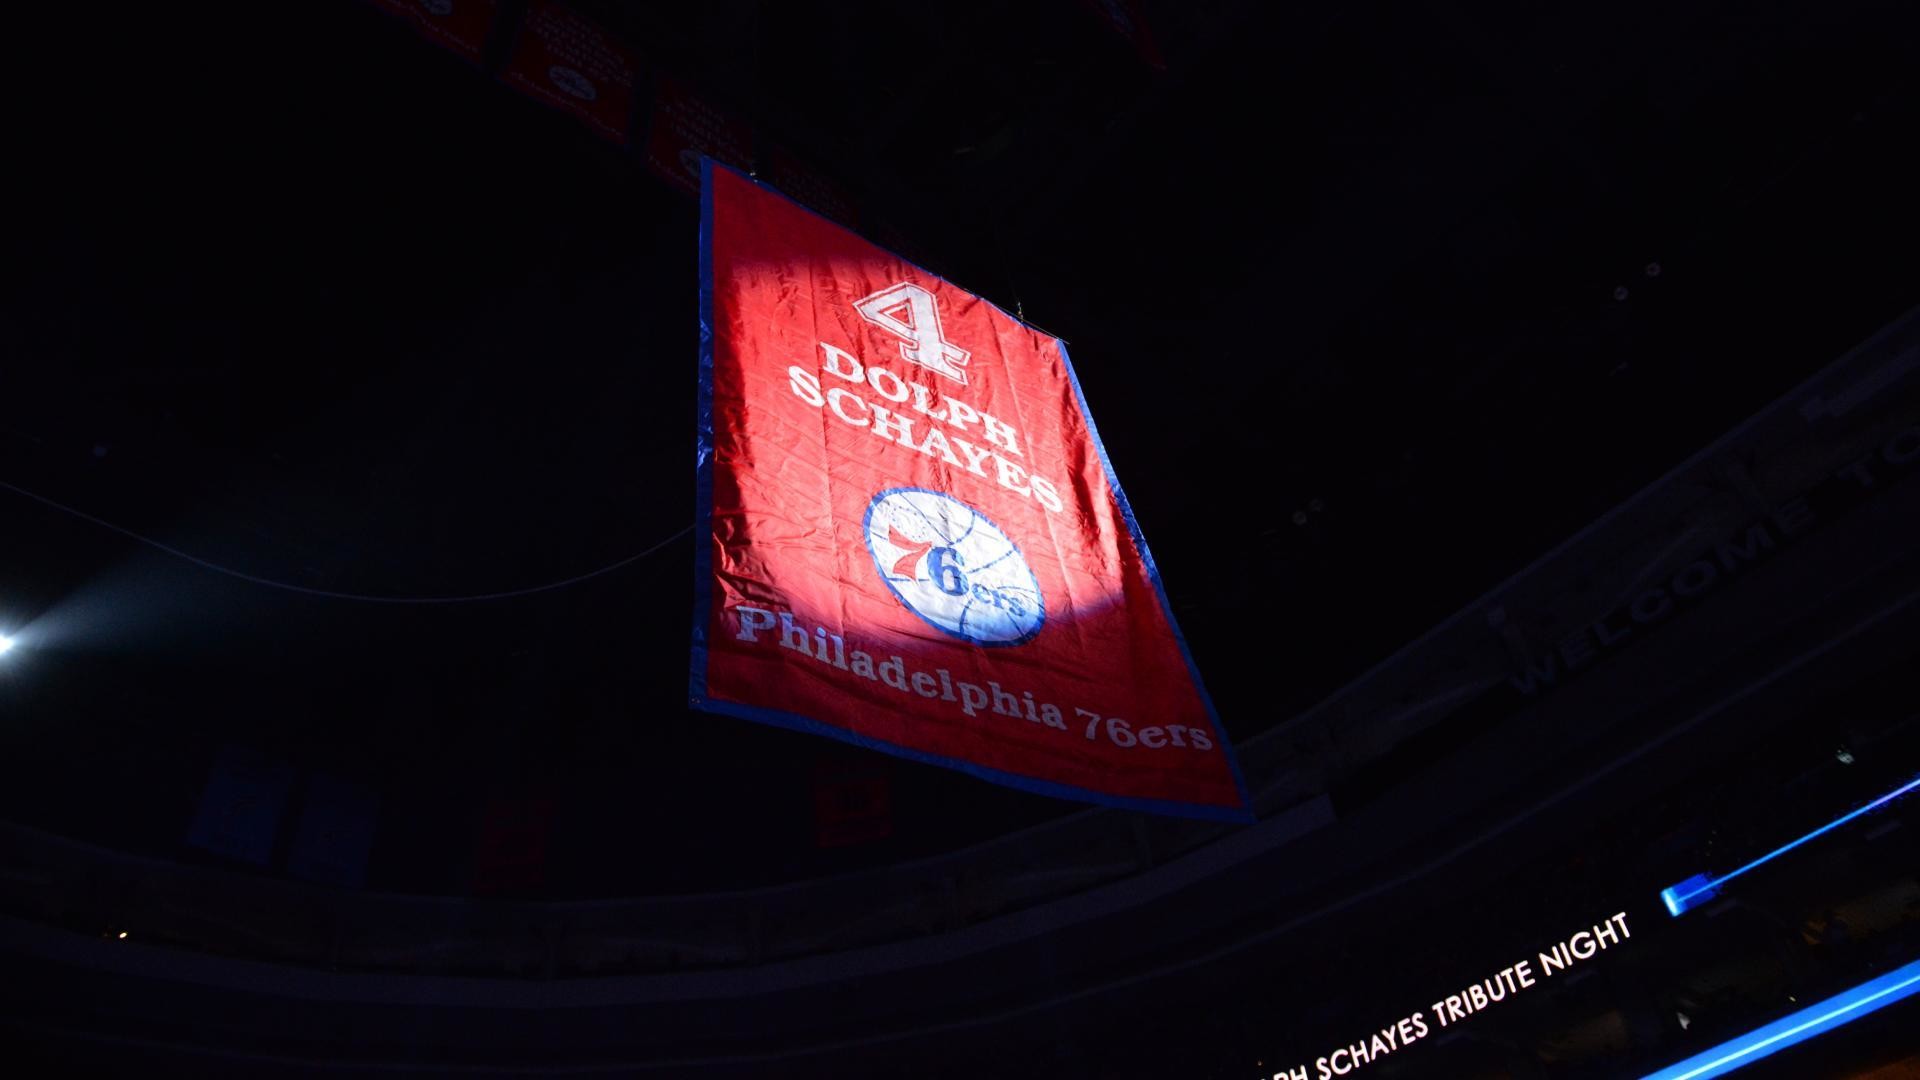 1920x1080 The Sixers retired Dolph Schayes' No. 4 uniform posthumously in 2016.